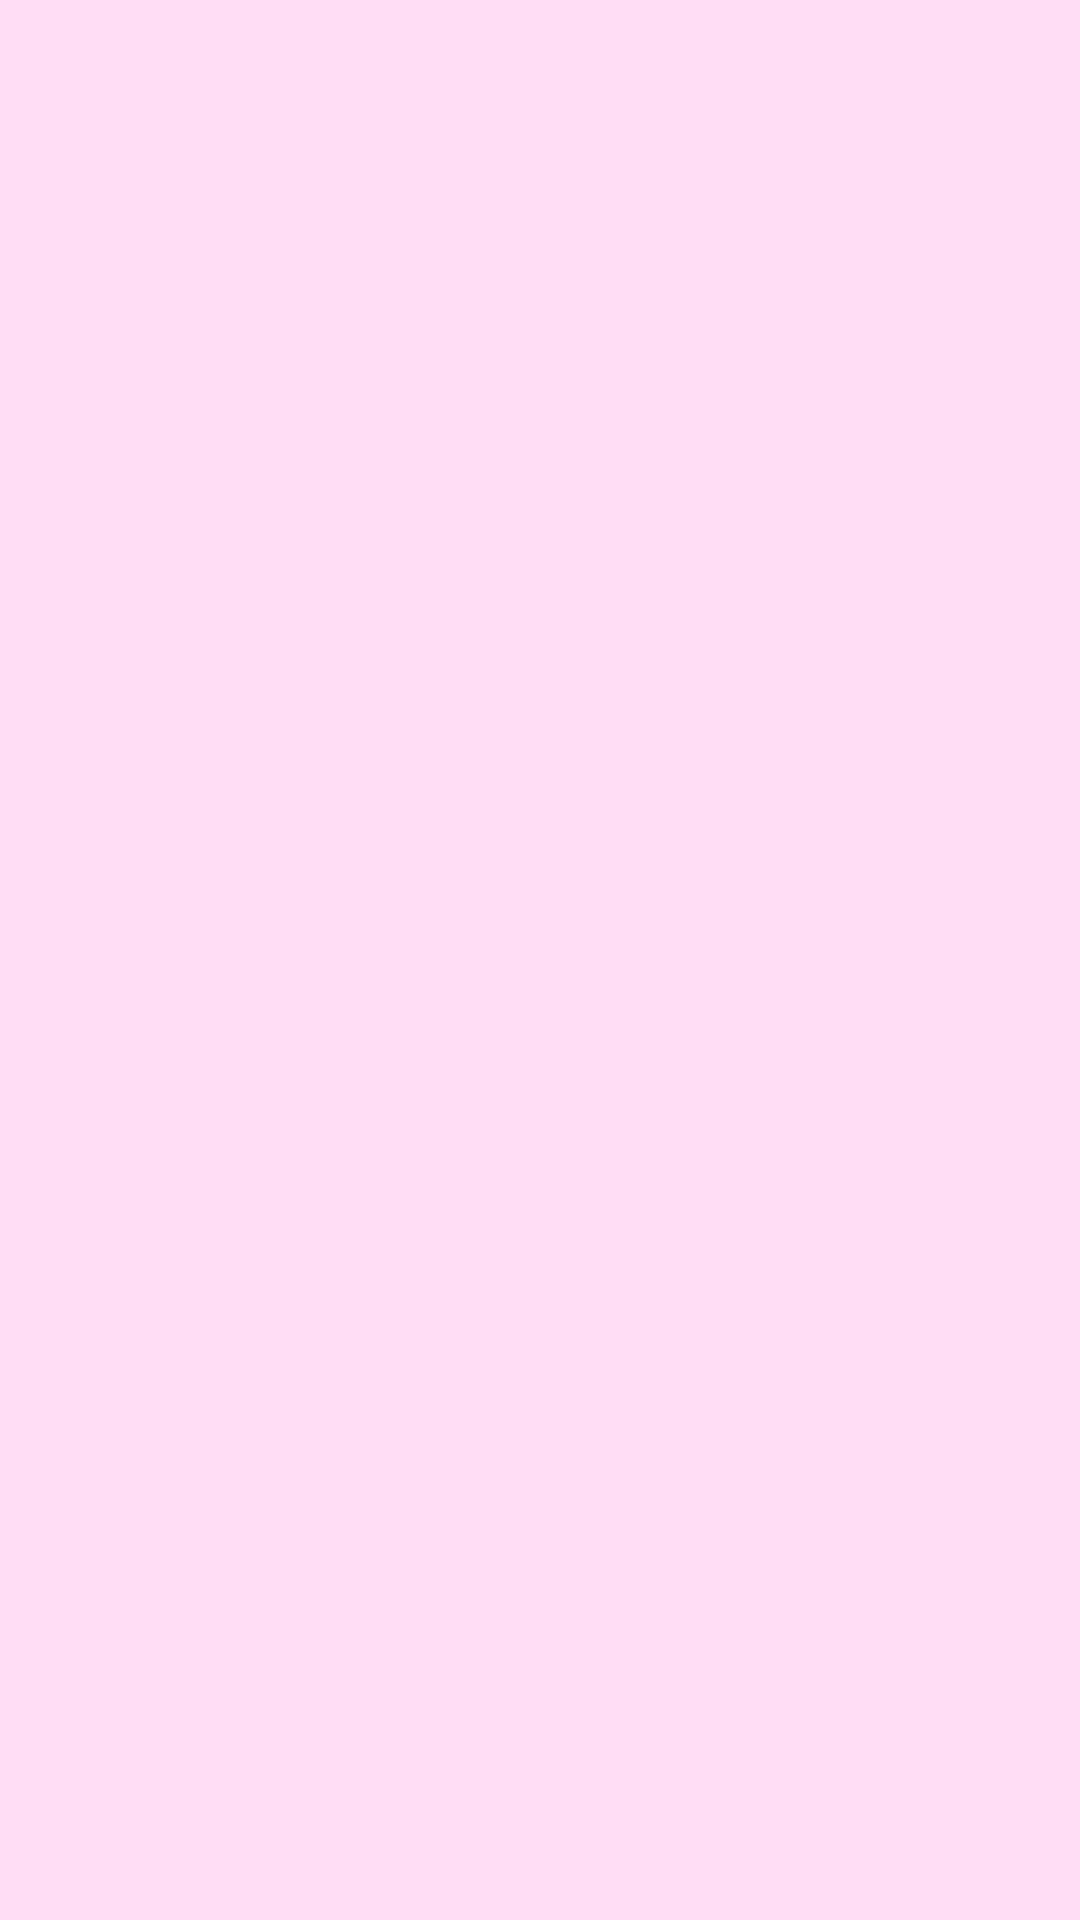 1080x1920 Pink Lace Solid Color Background